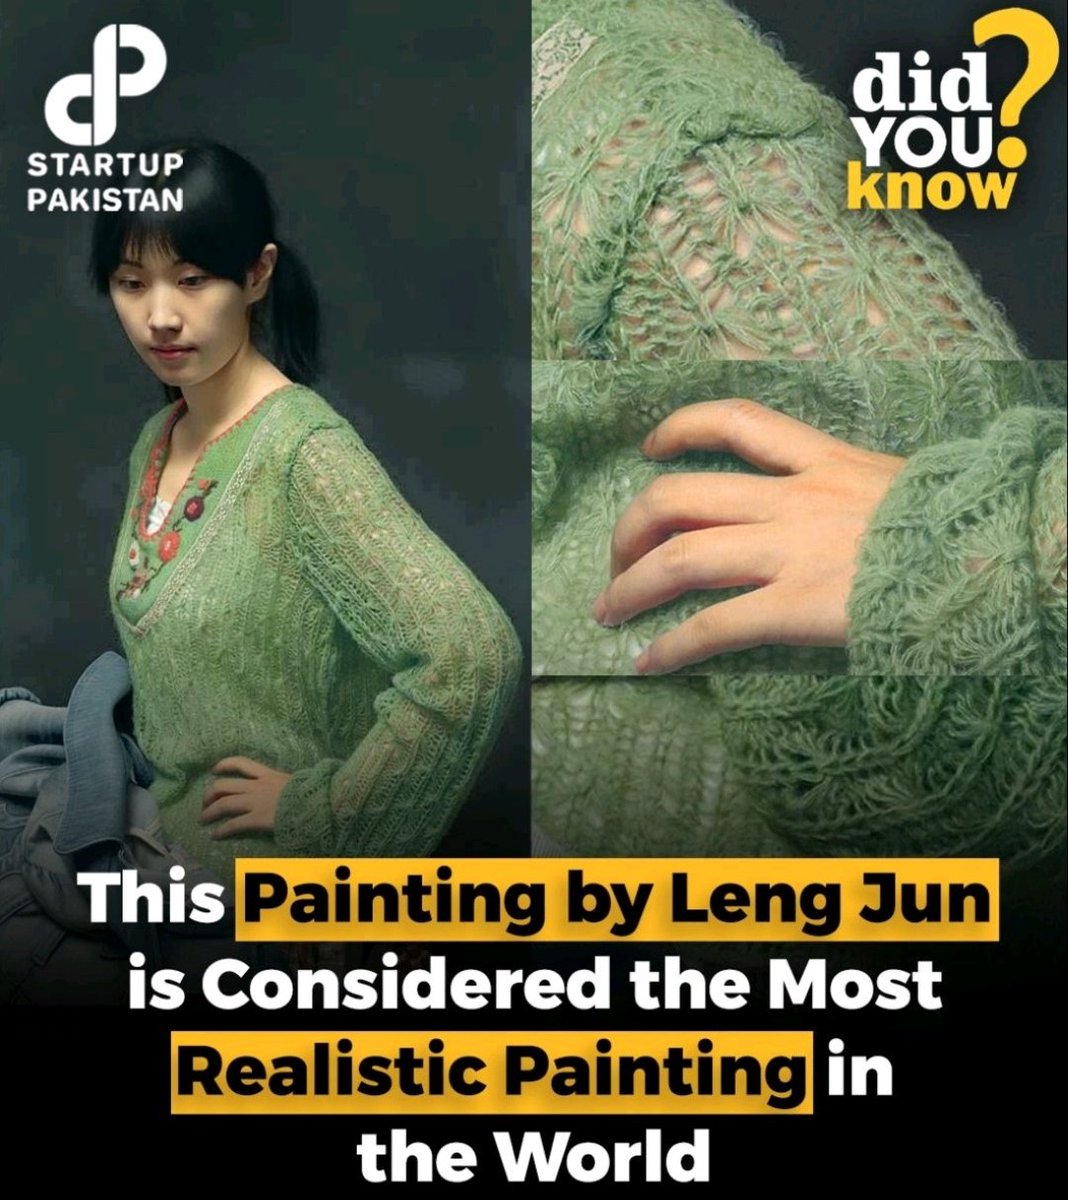 The most realistic painting in the world.

#paintings #artworks #diy #startuppakistan #abstractart #abstractpainting #entertainment #Japan